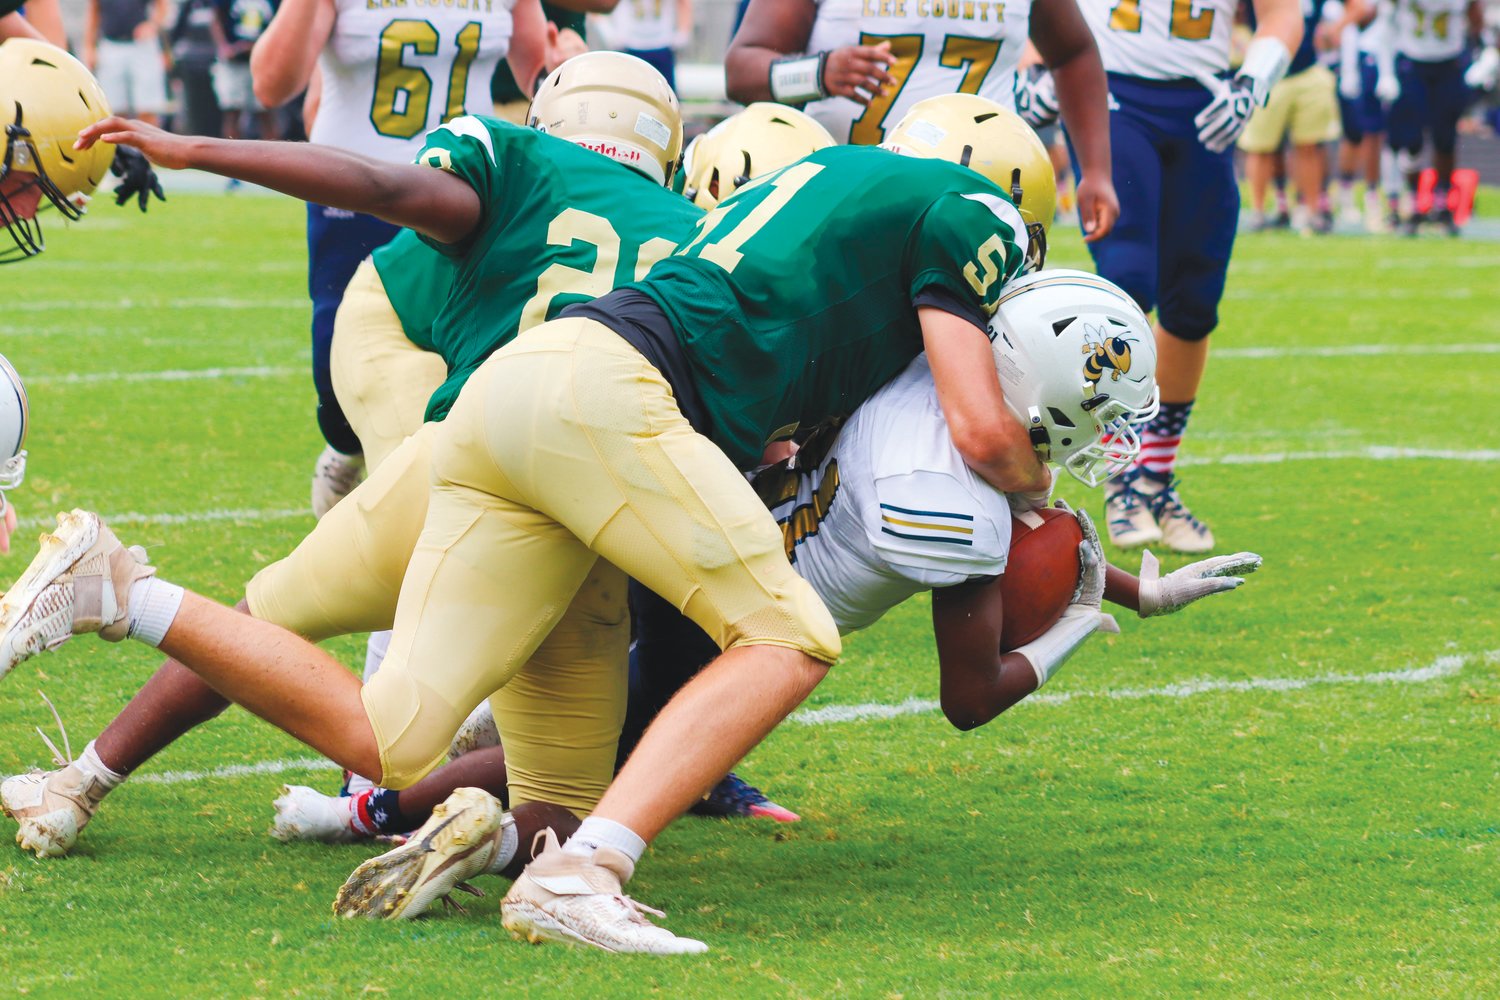 Northwood's Pierce Cook (51) tackles a Lee County ball carrier in the Chargers' season-opening loss to the Yellow Jackets, 62-0, last Saturday in Pittsboro.